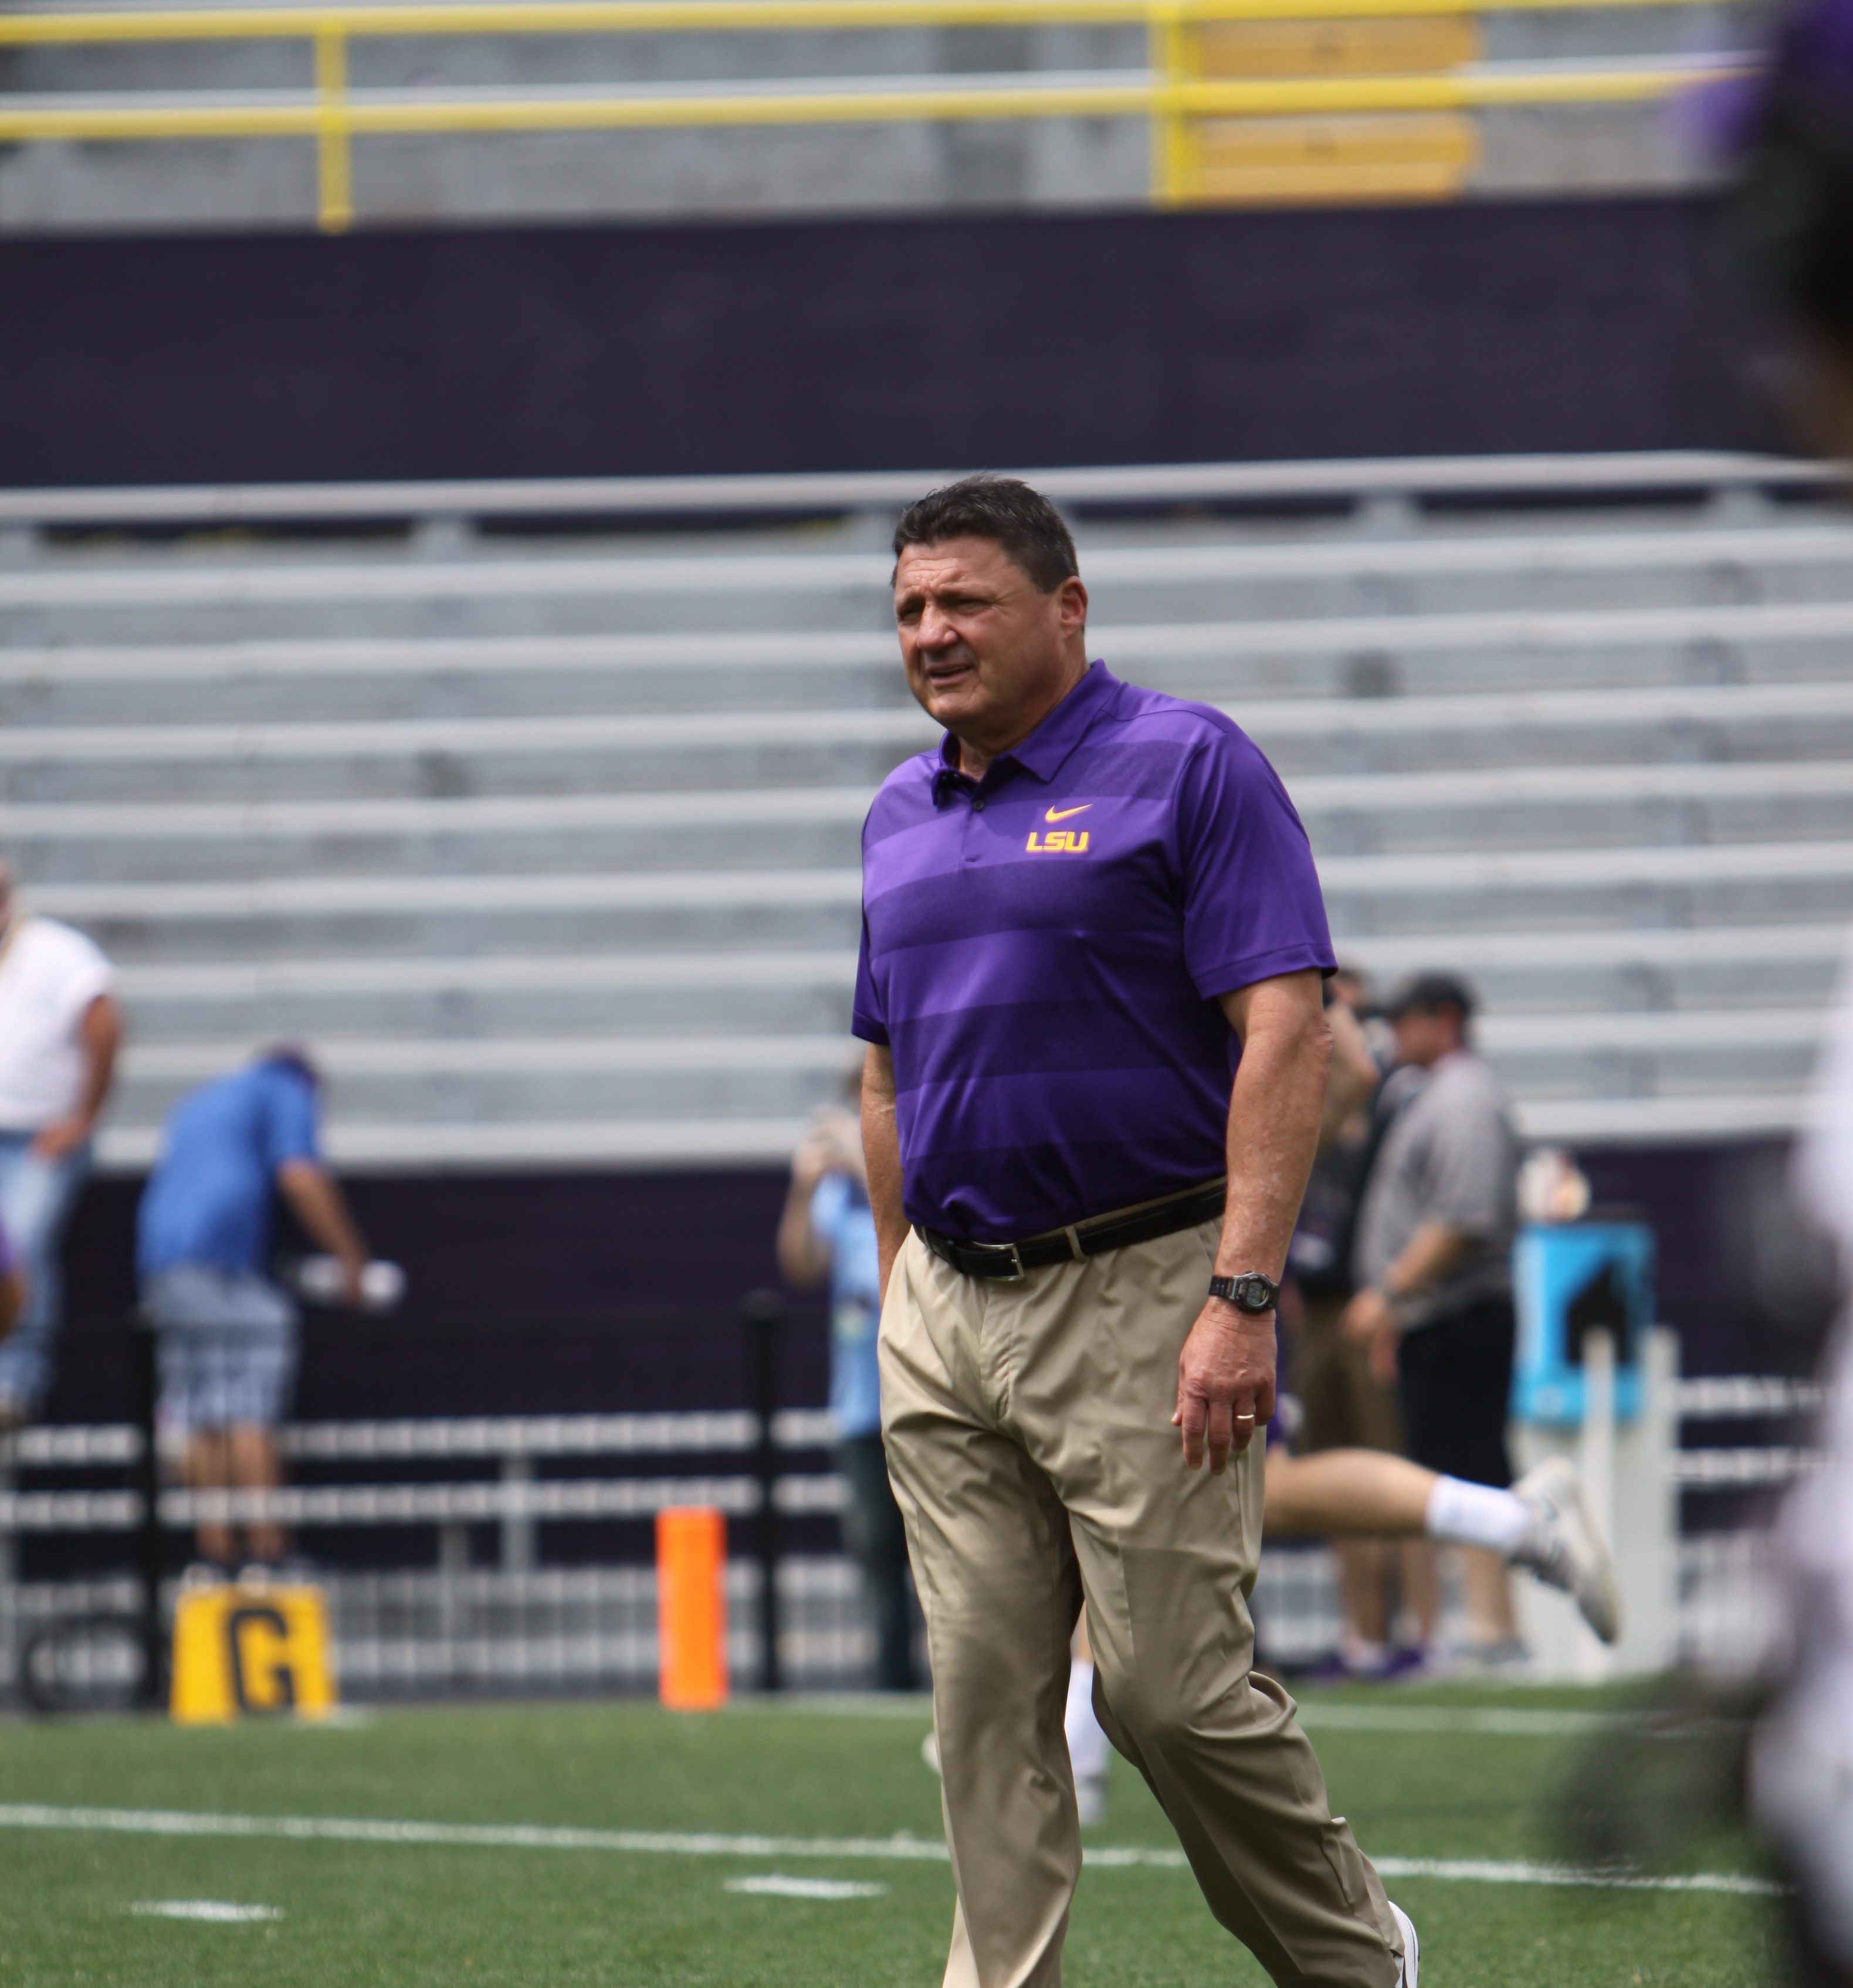 LSU’S ORGERON NAMED SEMIFINALIST FOR MUNGER COACH OF THE YEAR AWARD